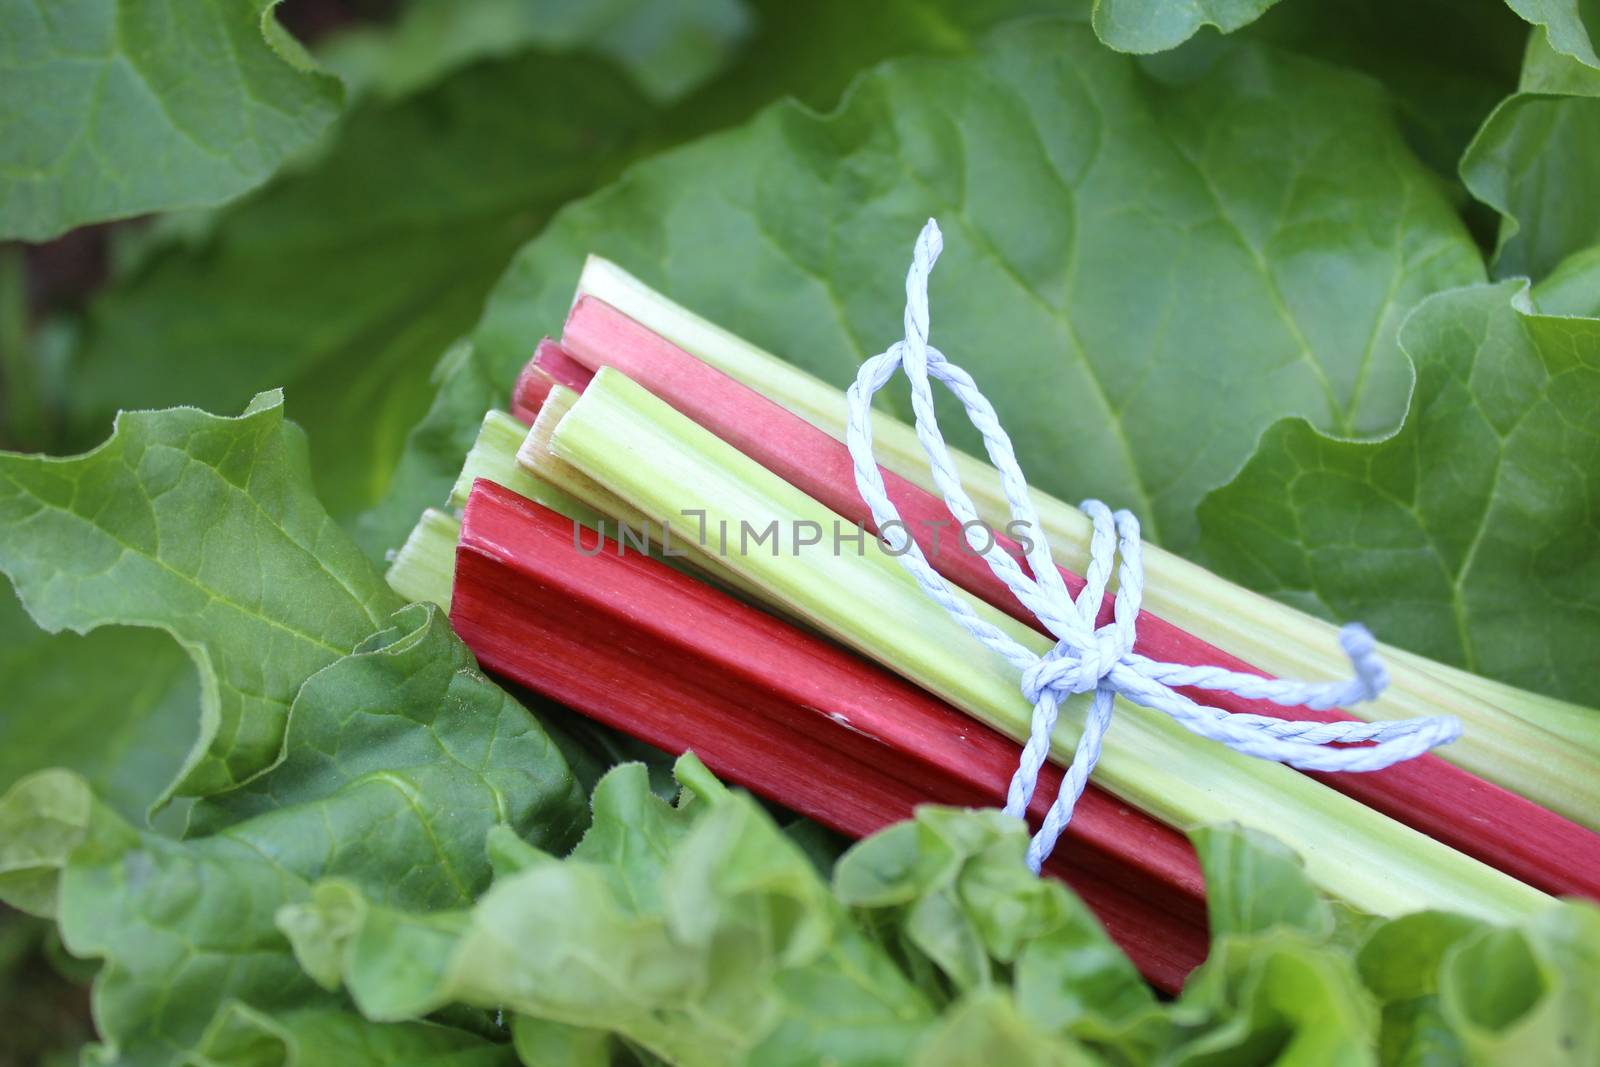 The picture shows colorful delicious rhubarb in the garden.